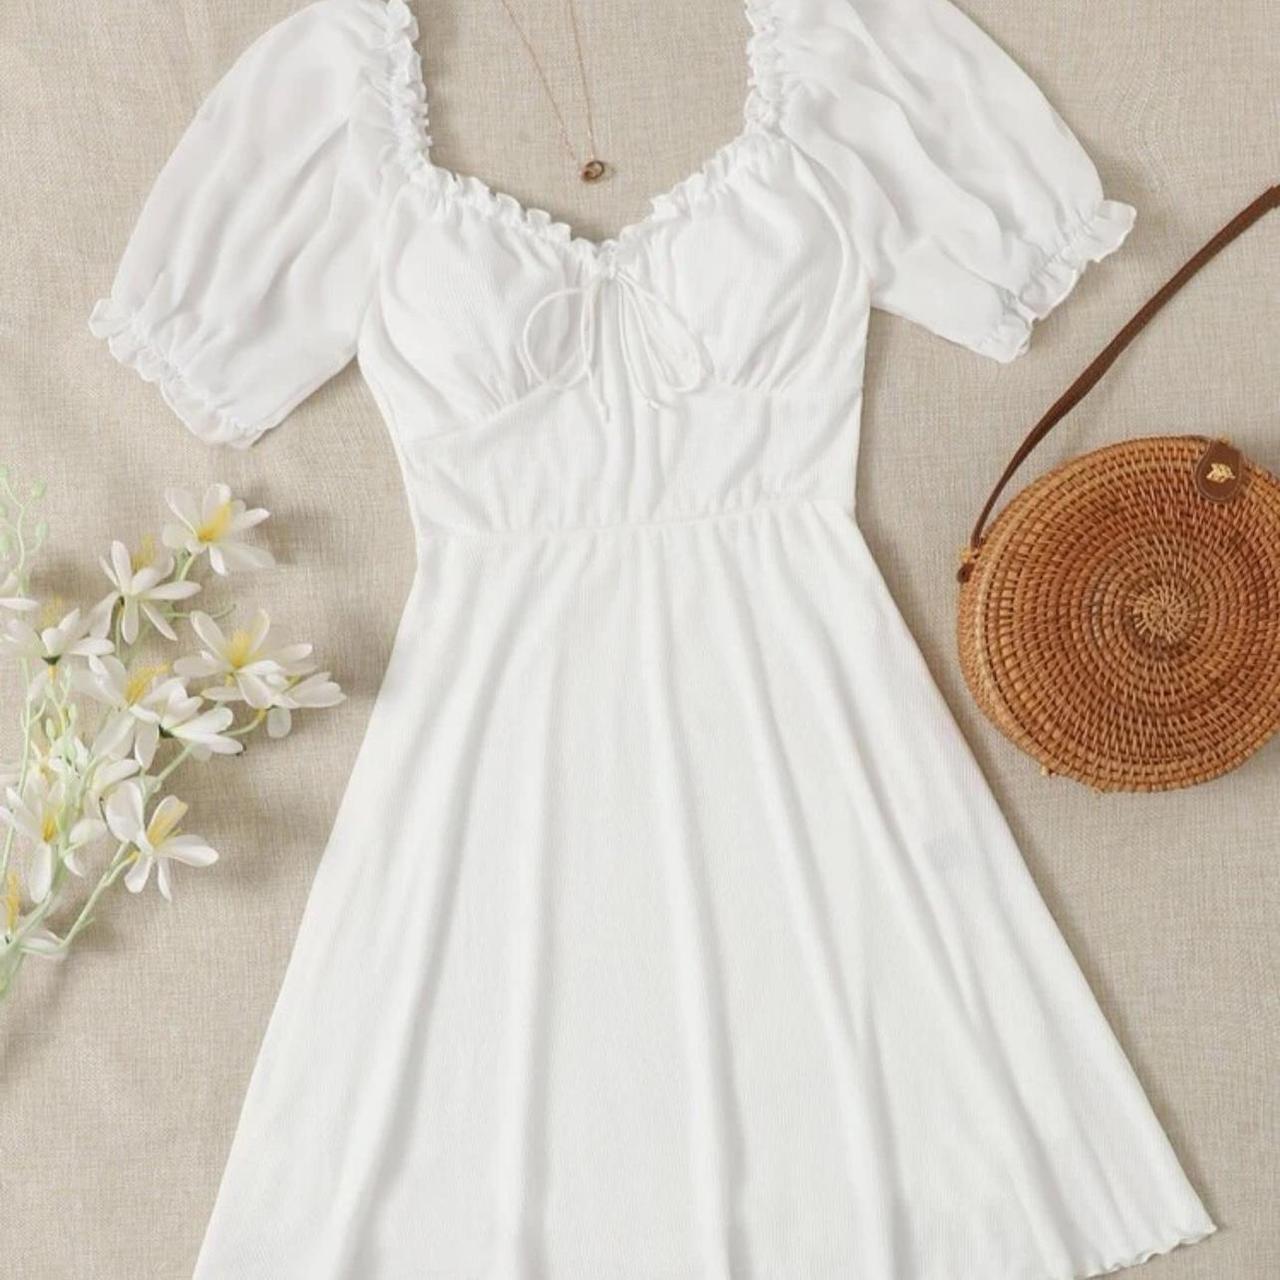 shein white dress (pictures not mine) size XS never - Depop